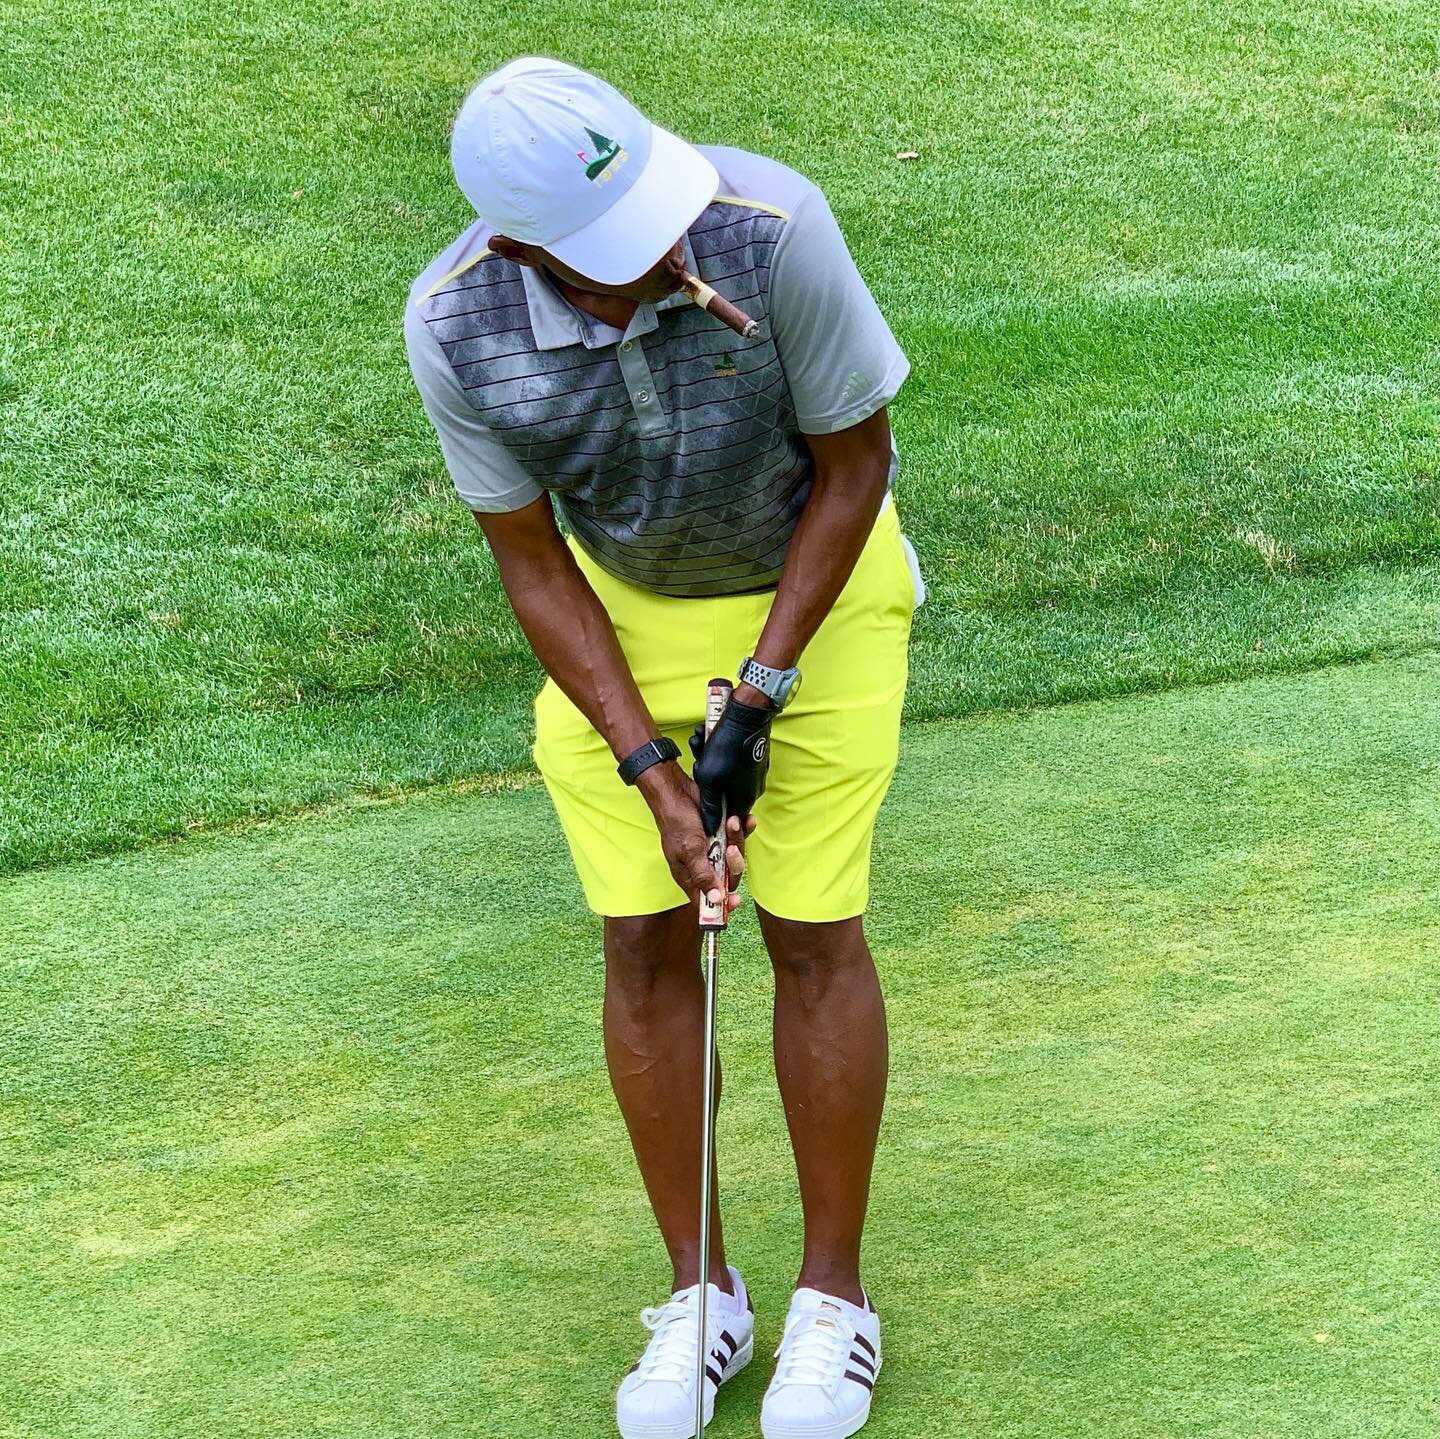 There&rsquo;s not a better dressed, well coordinated golfer on the course than my friend @kevinlileskwl Note the yellow shorts, shirt accent and, of course, yellow golf ball. #alwaysacigar And, yes, he did sink the putt. Always a party when we are to